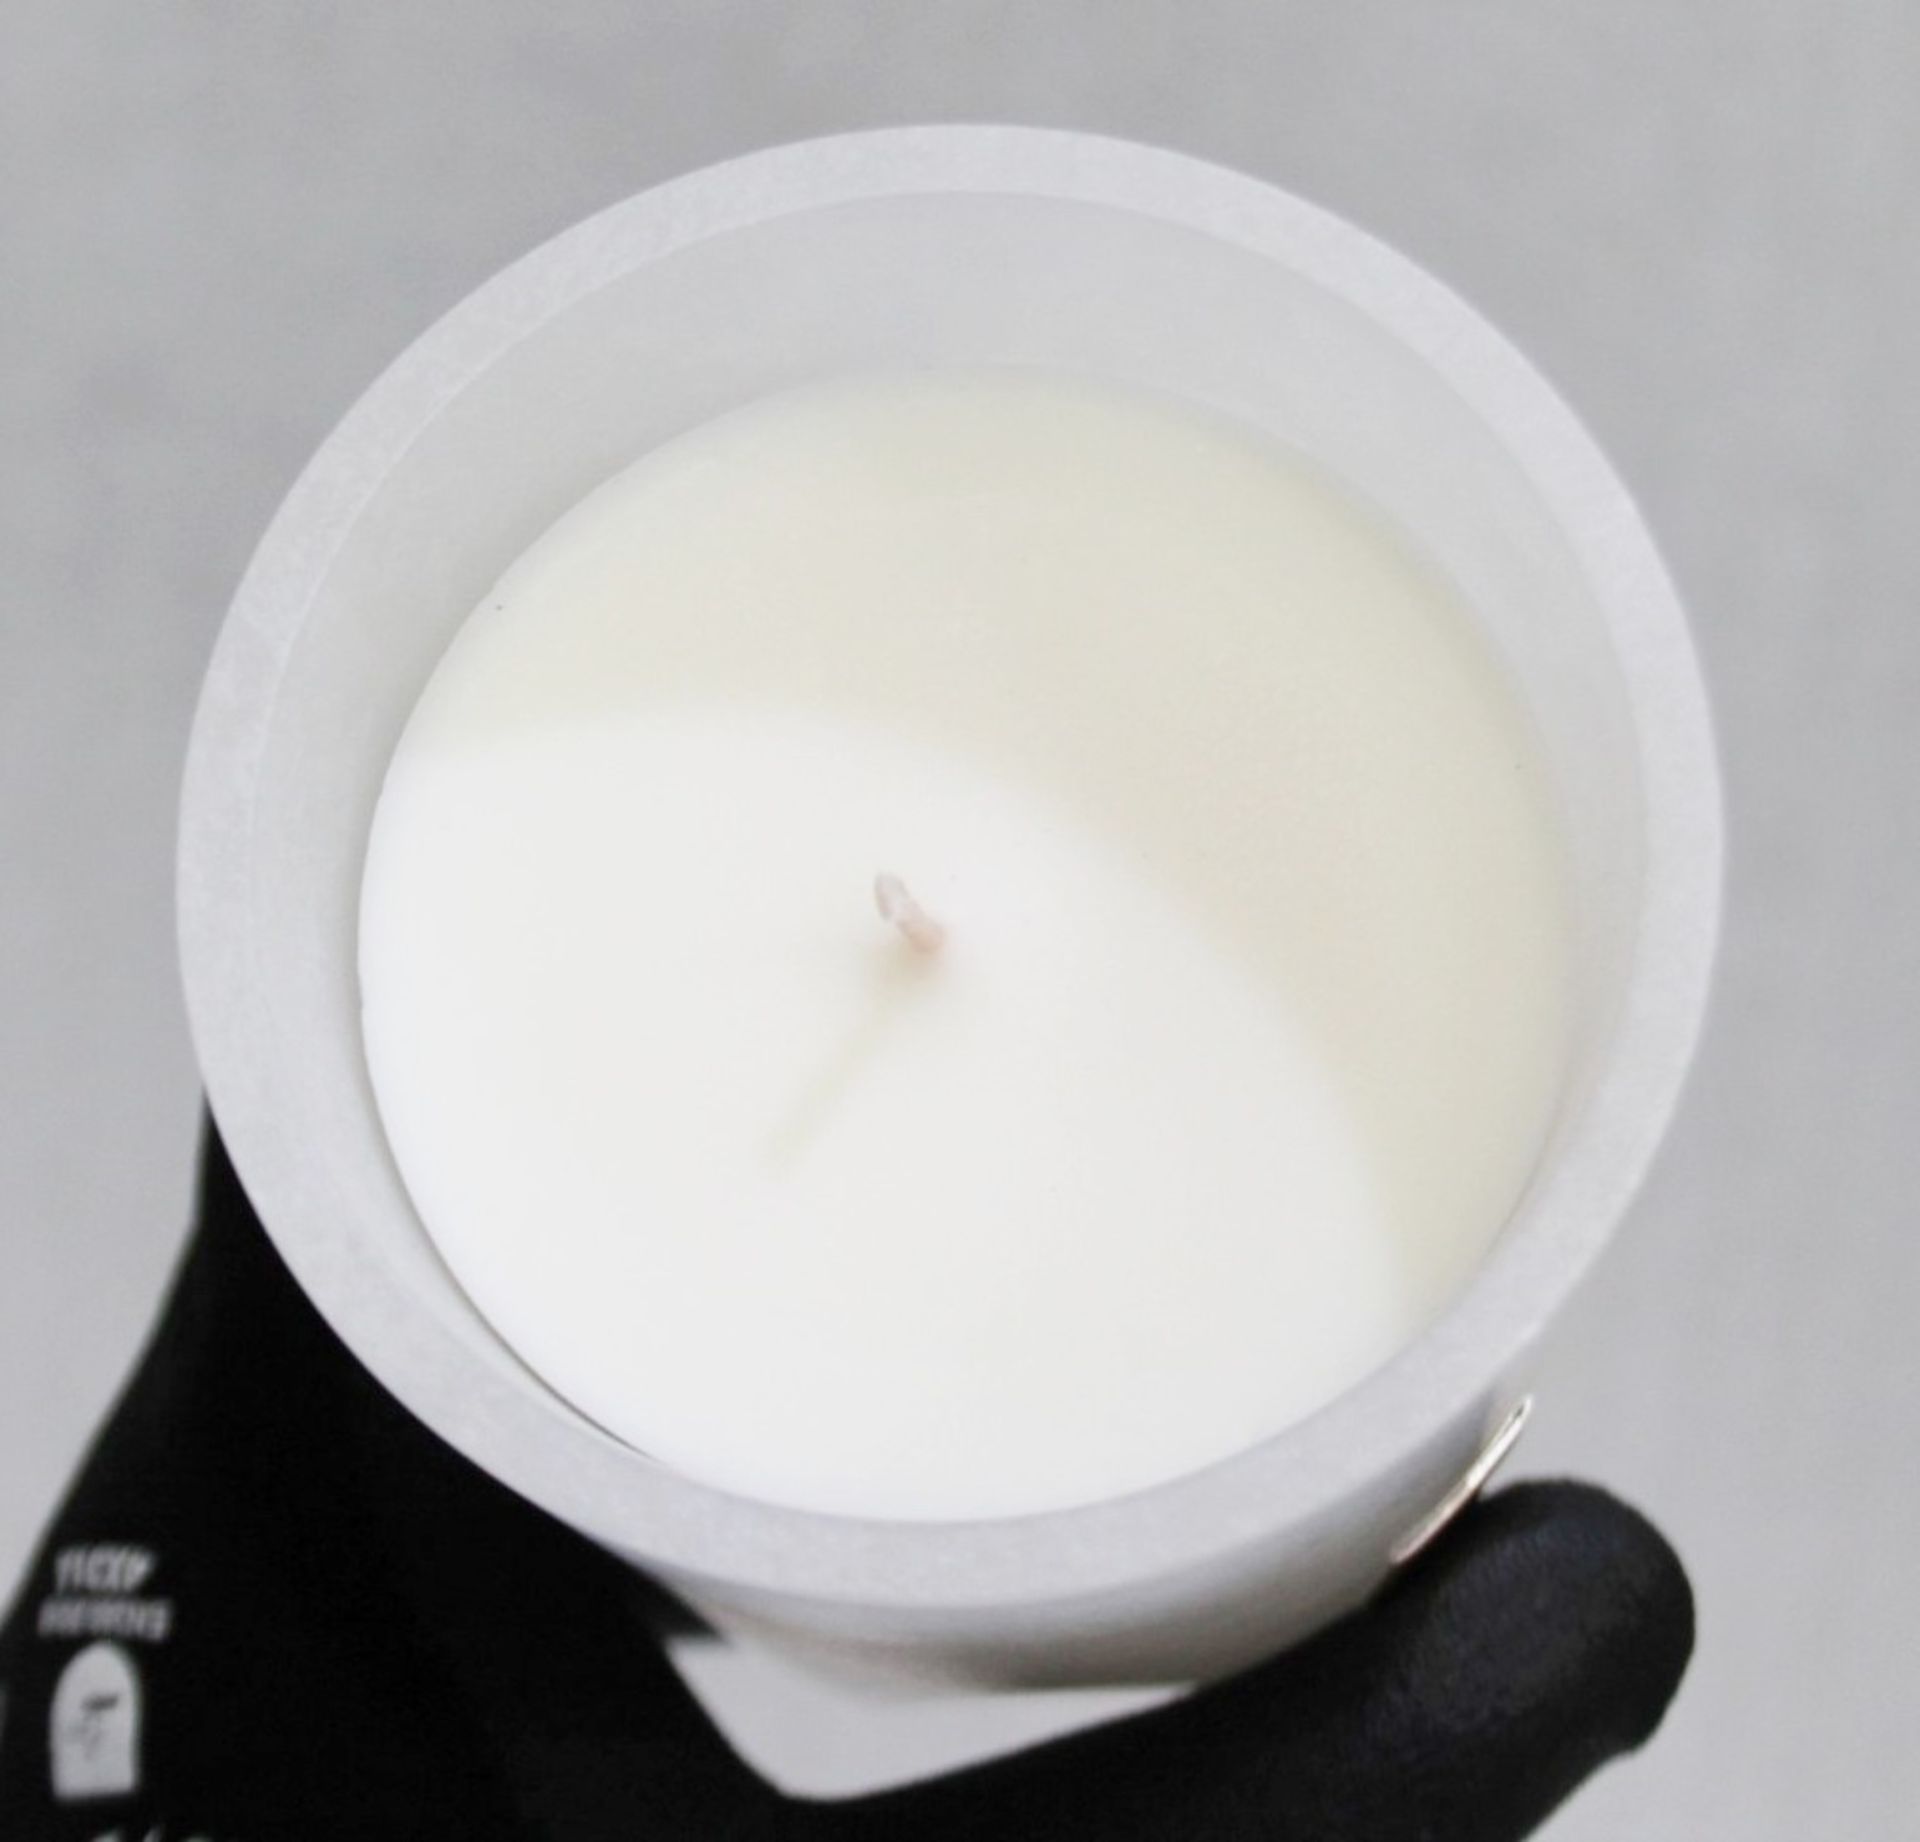 1 x TRUDON Luxury 'Hemera' Scented Candle In Alabaster (270g) - Original Price £170.00 - Boxed Stock - Image 3 of 12